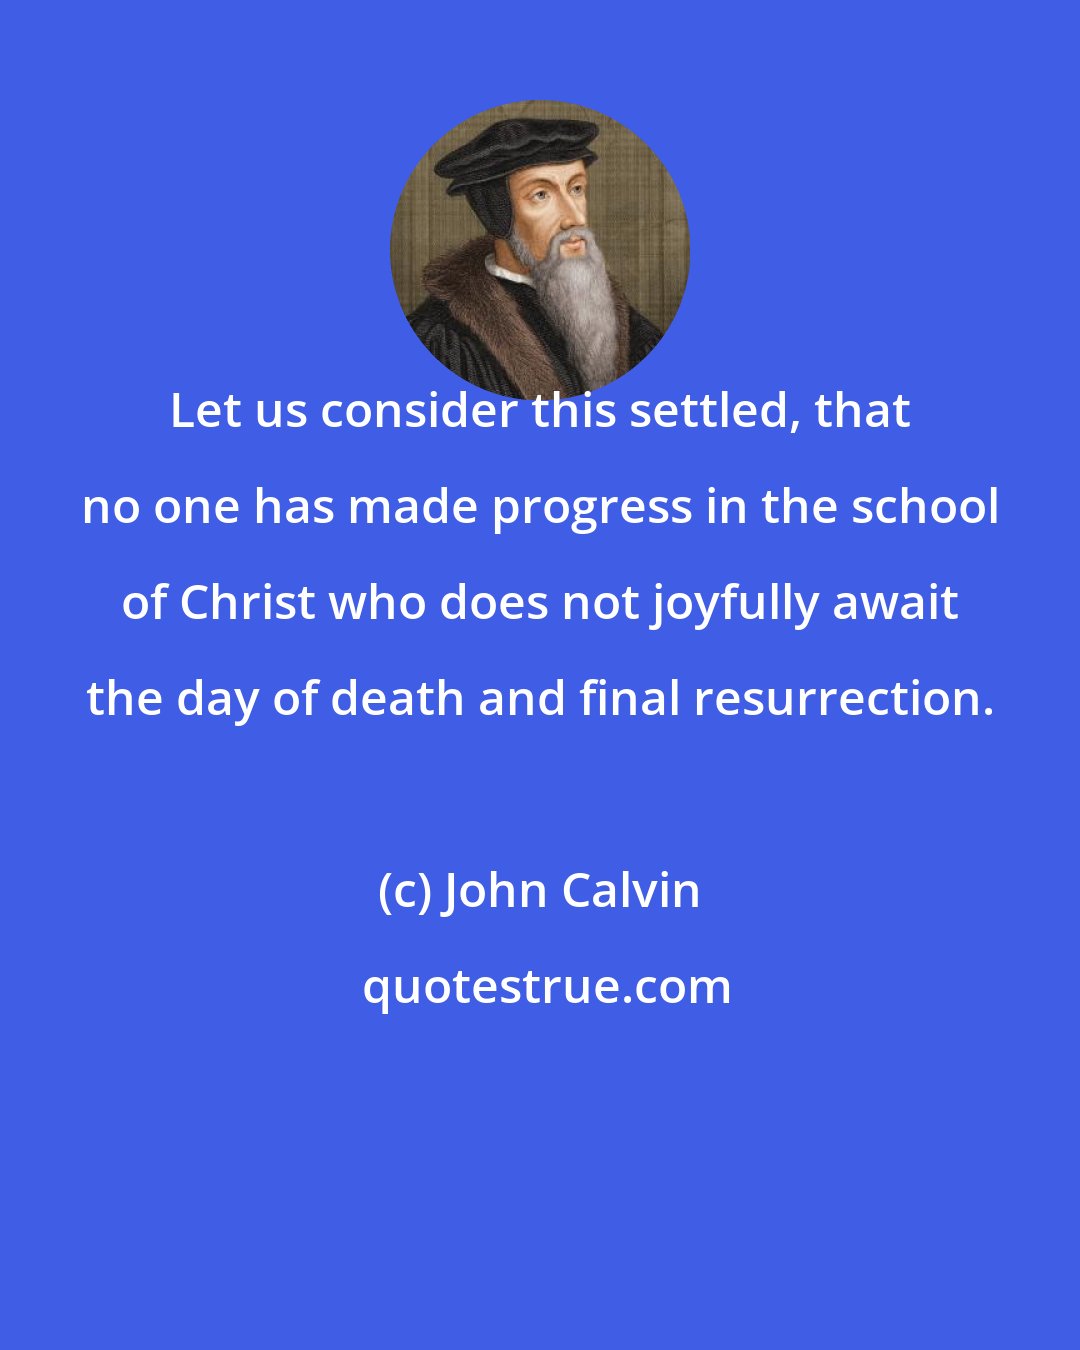 John Calvin: Let us consider this settled, that no one has made progress in the school of Christ who does not joyfully await the day of death and final resurrection.